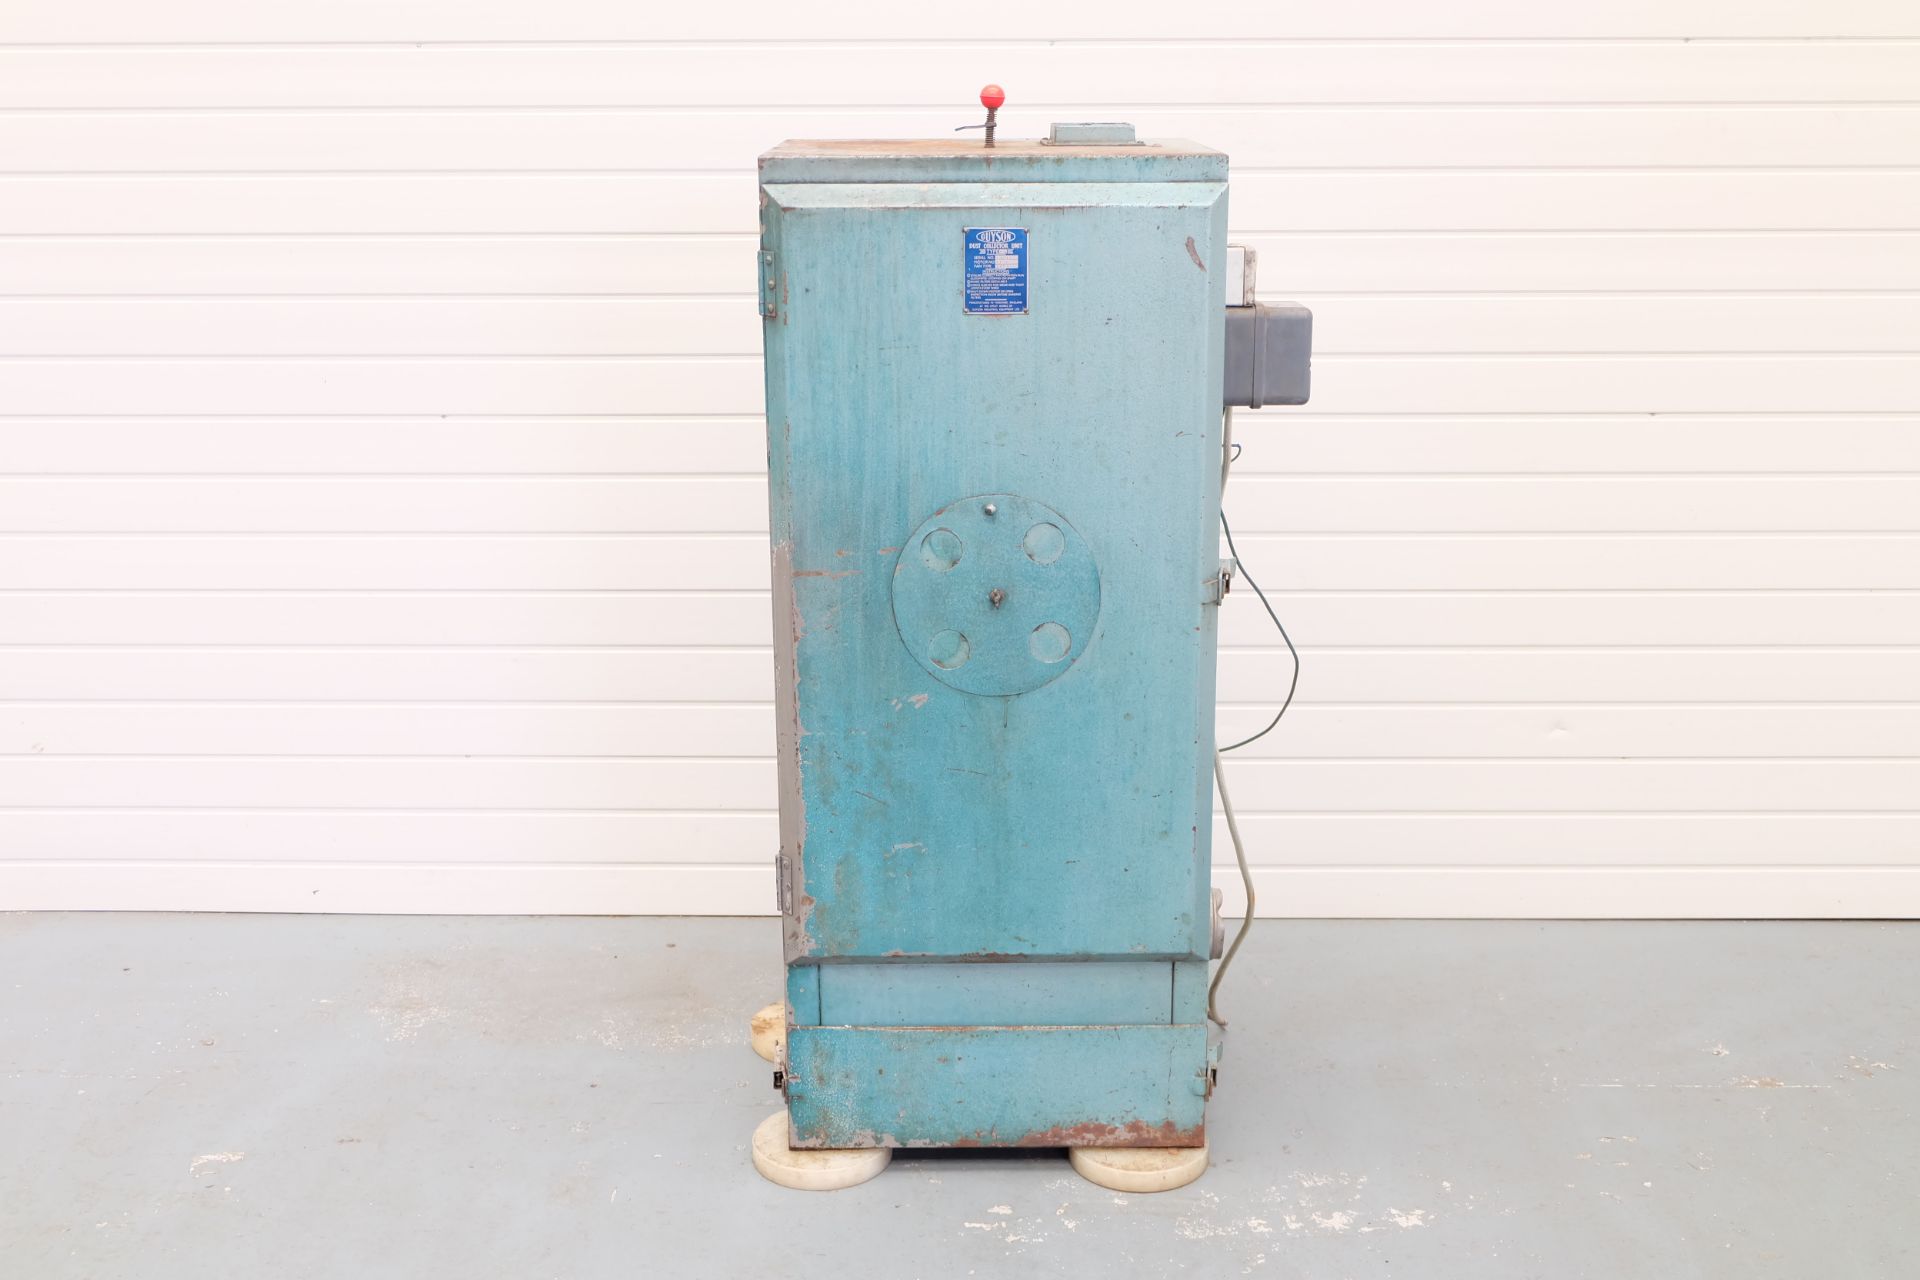 Guyson Type 40 Dust Collection Unit. External Dimensions 22" x 20". Height 52".